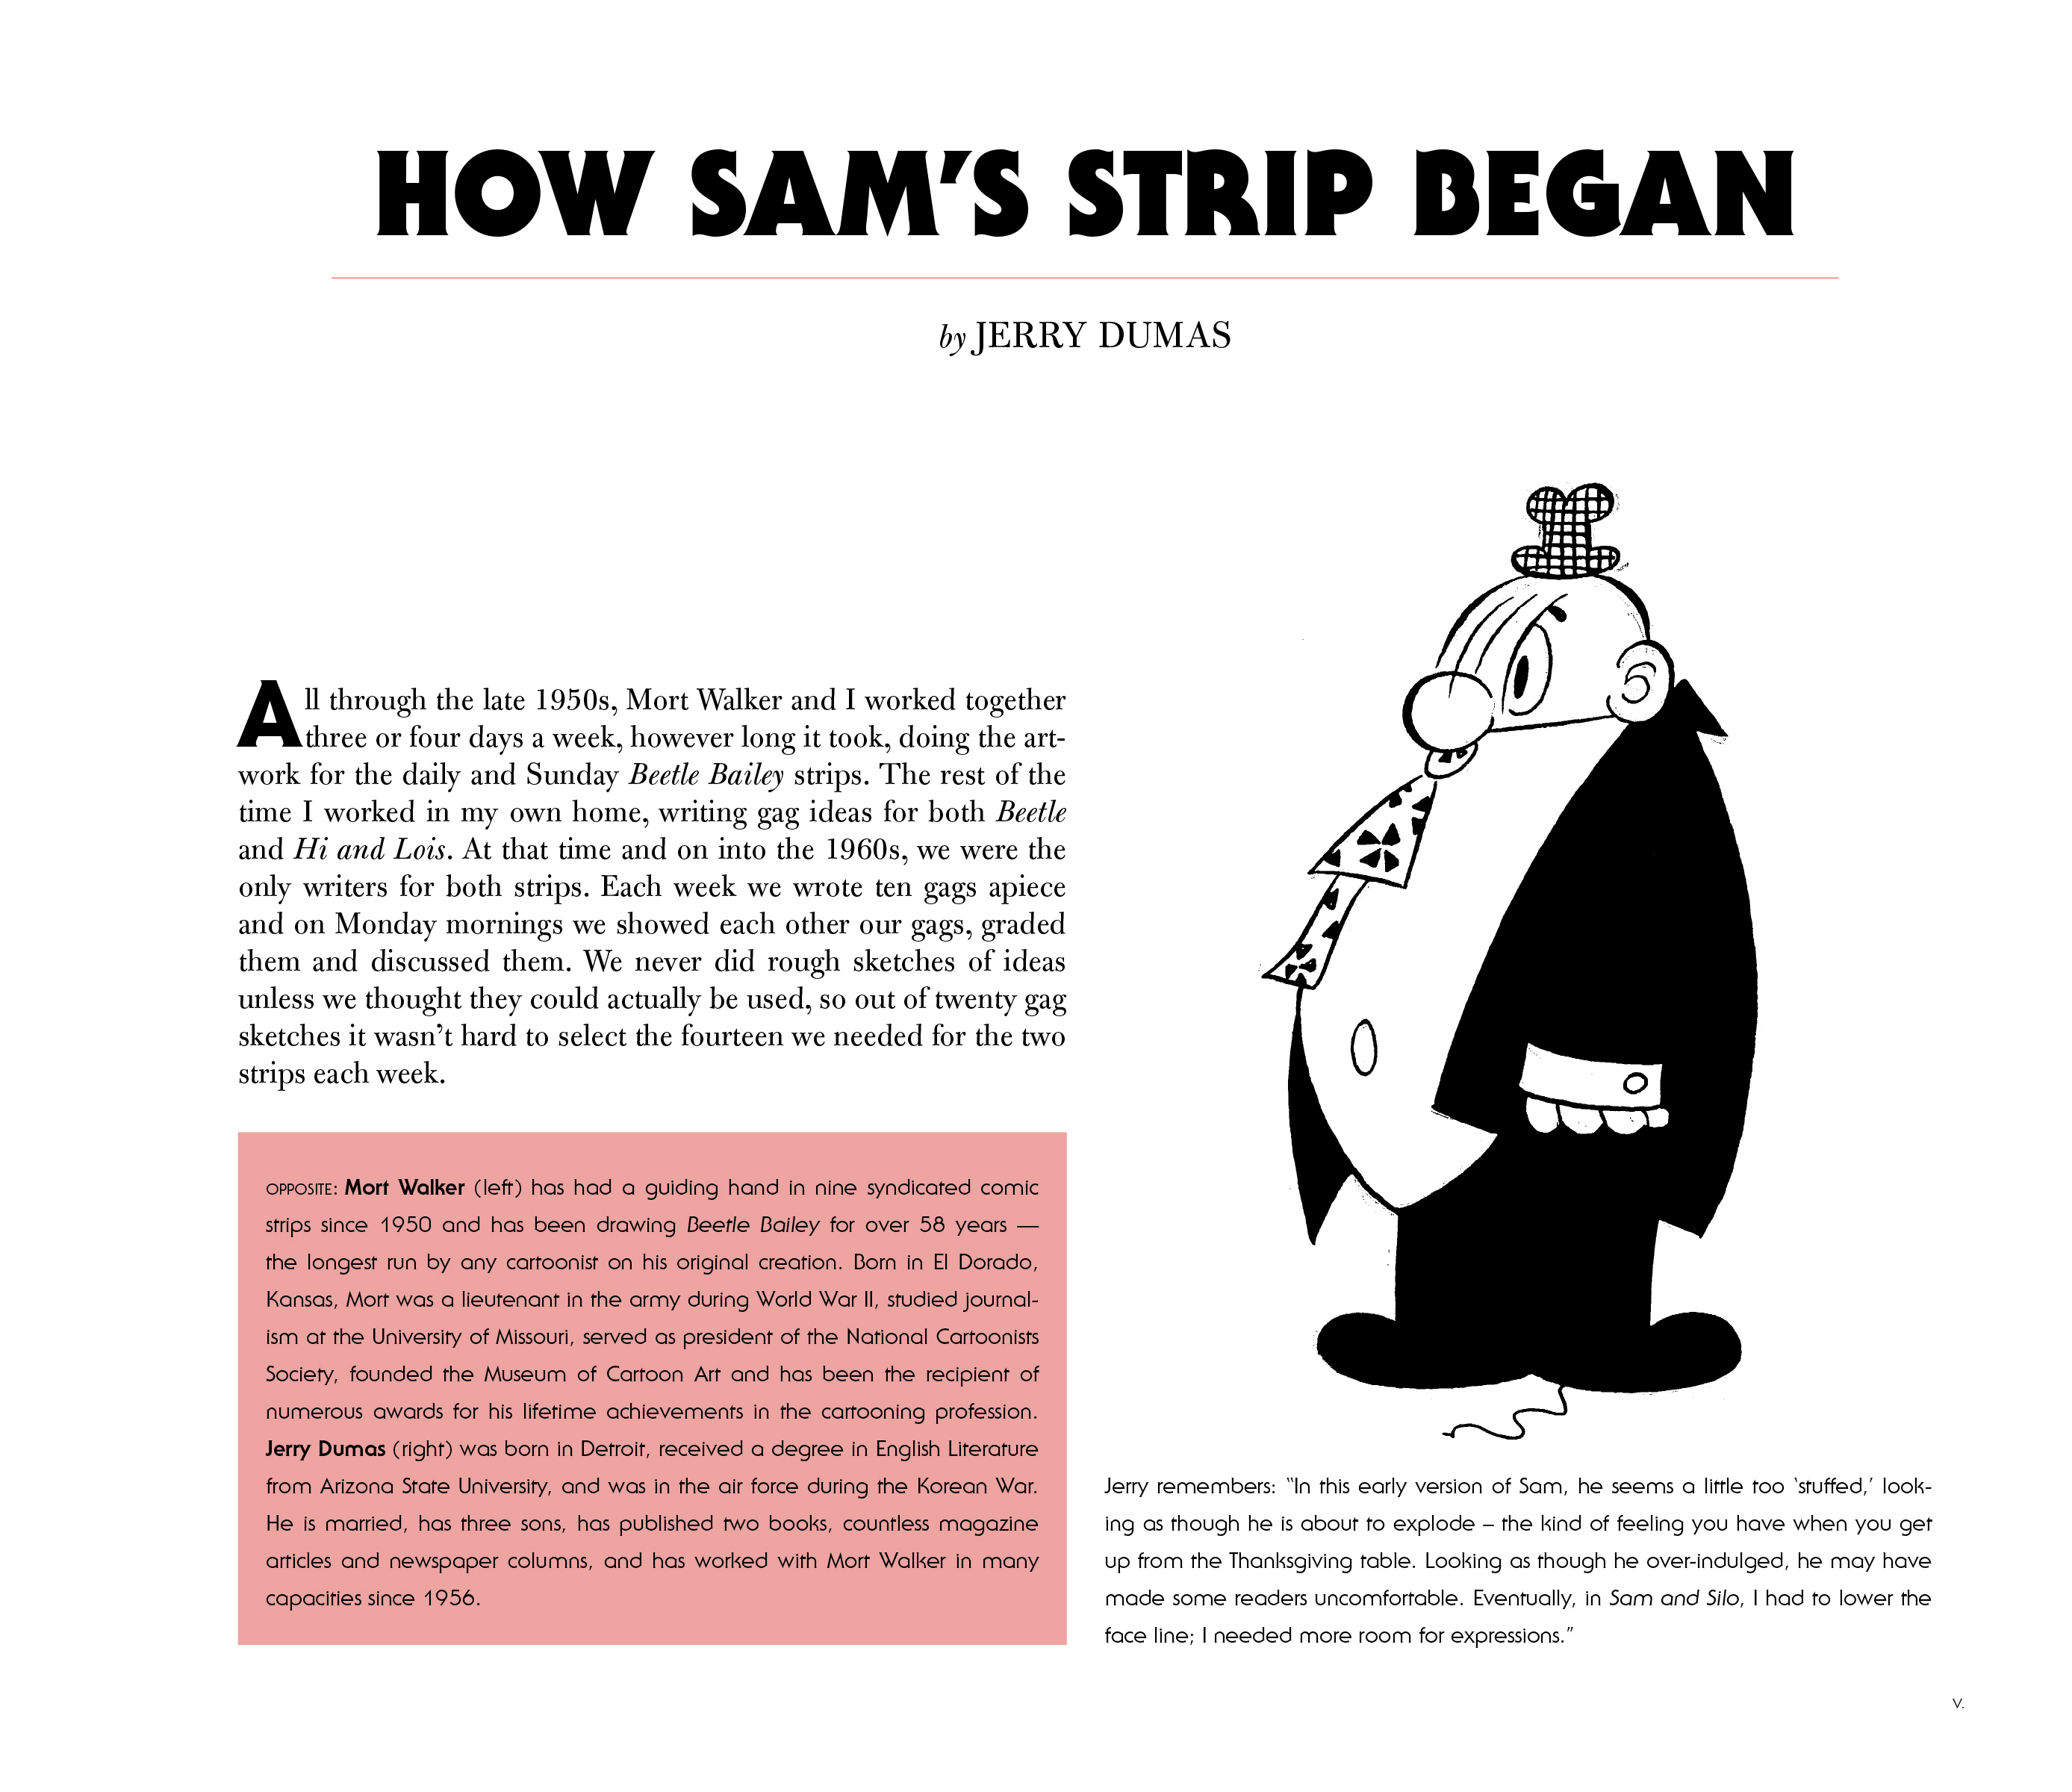 Read online Sam's Strip: The Comic About Comics comic -  Issue # TPB (Part 1) - 6